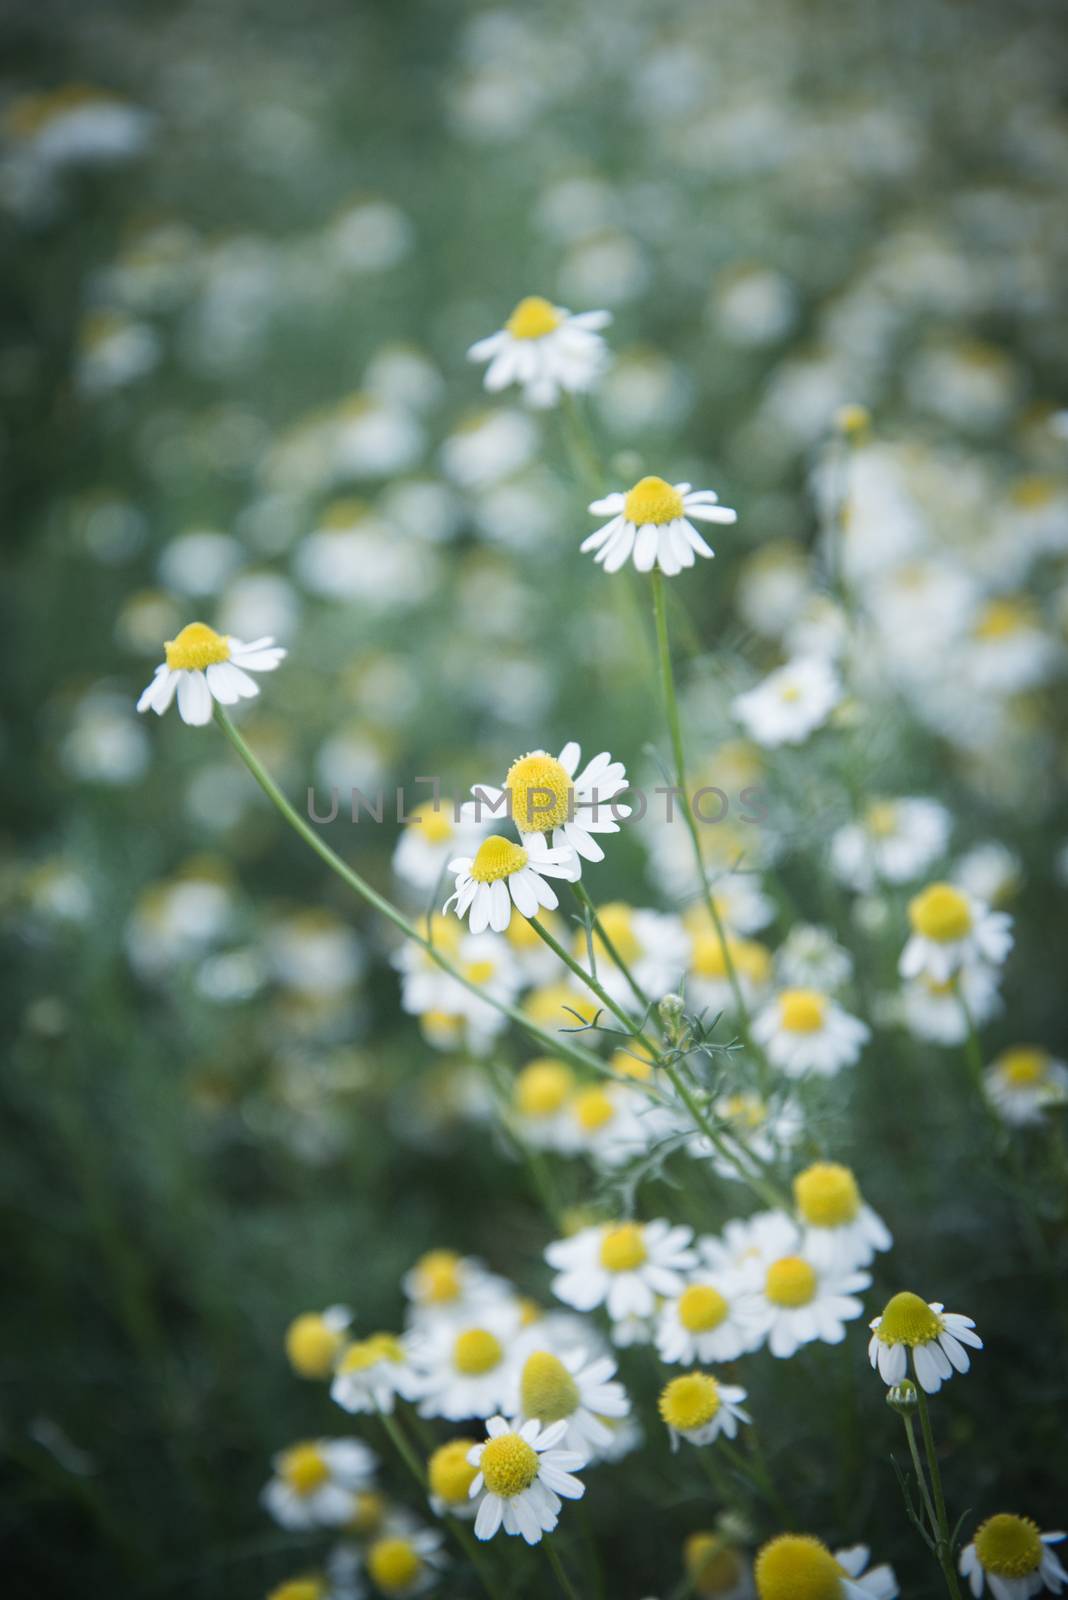 An image of a beautiful daisy flowers  Filtered Images